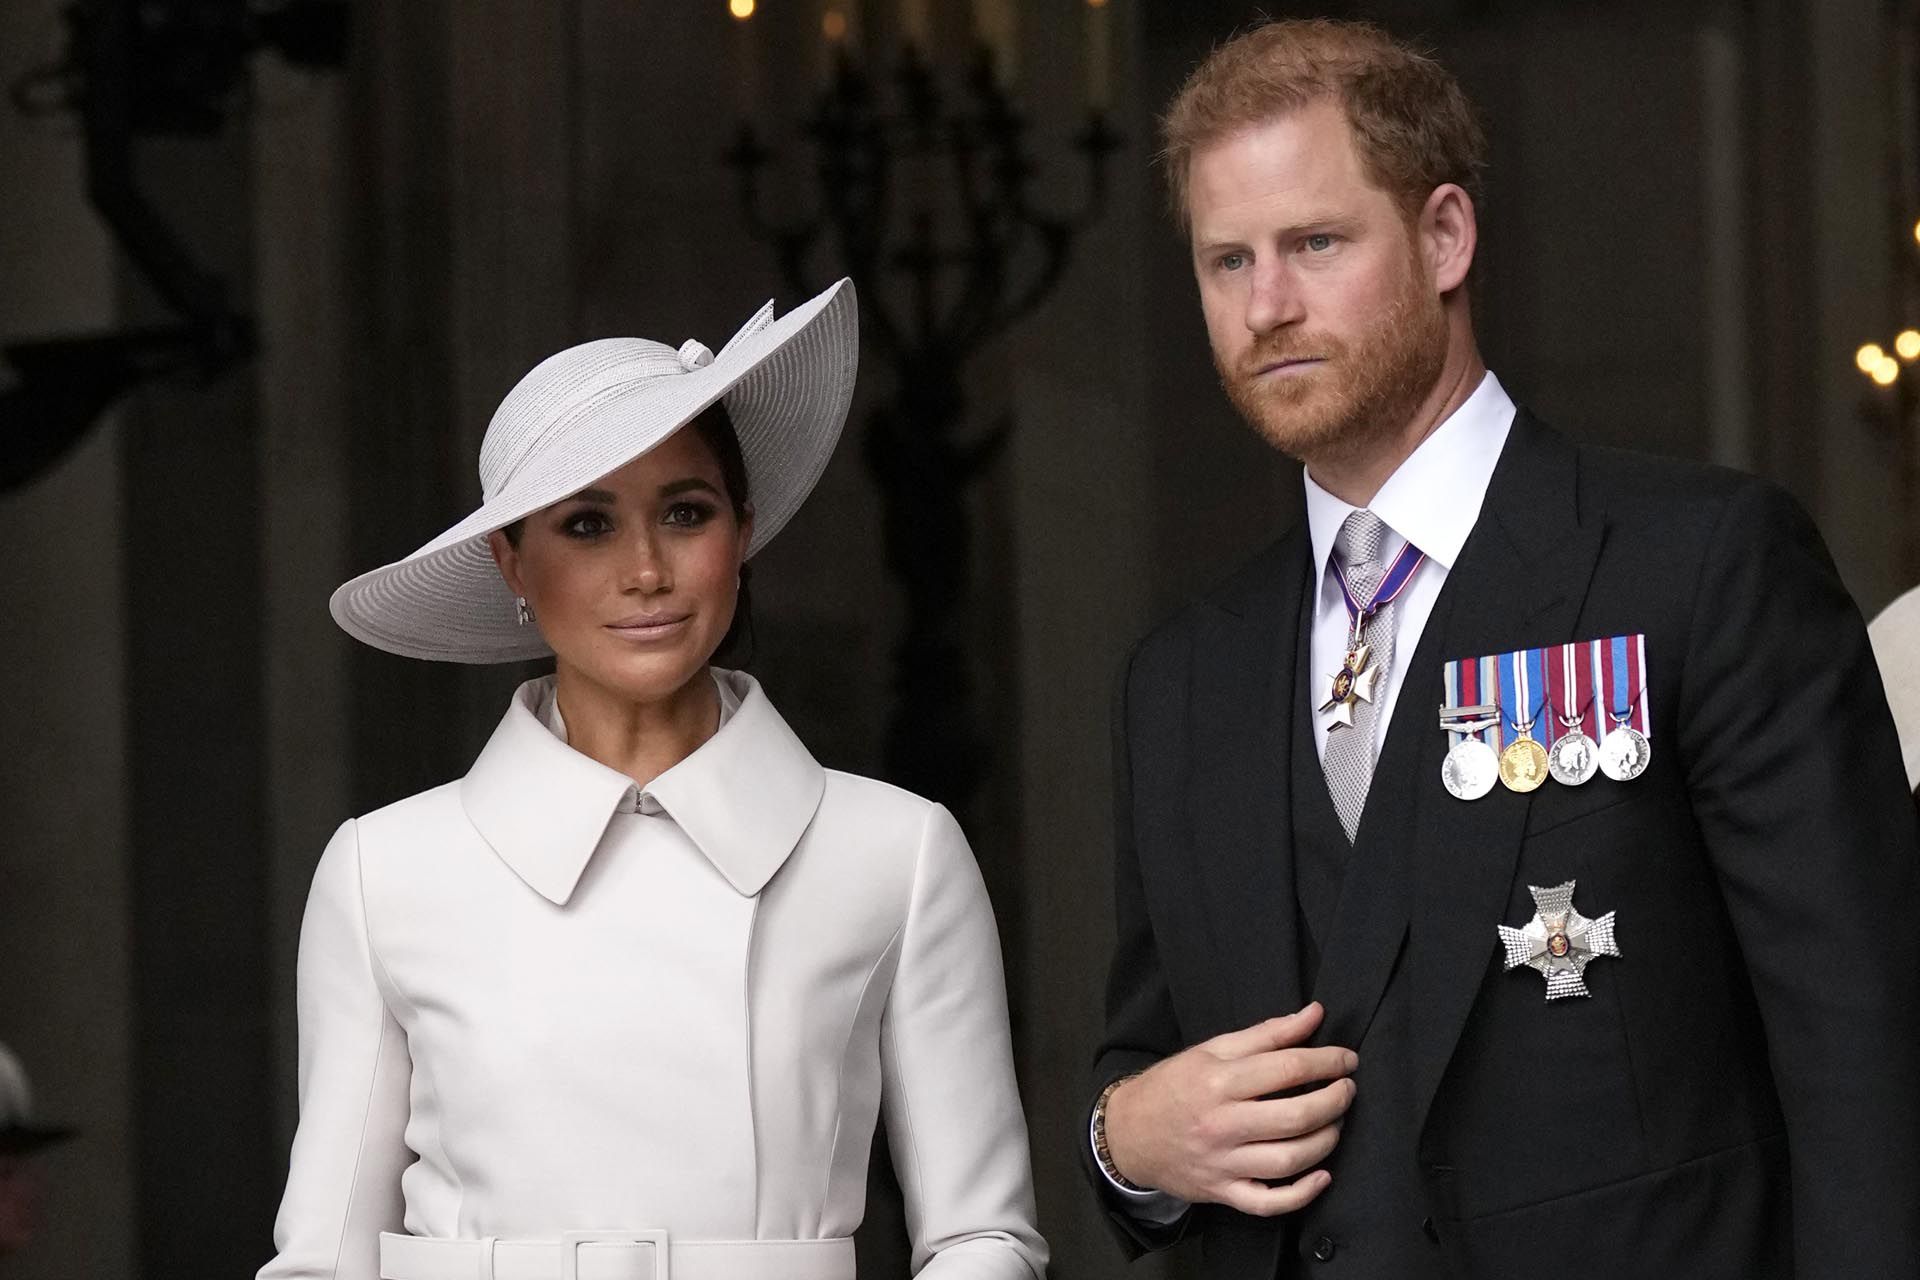 Prince Harry and Meghan Markle, Duke and Duchess of Sussex after a service of thanksgiving for the reign of Queen Elizabeth II at St Paul's Cathedral in London, Friday, June 3, 2022 (AP Photo/Matt Dunham , Pool, File)